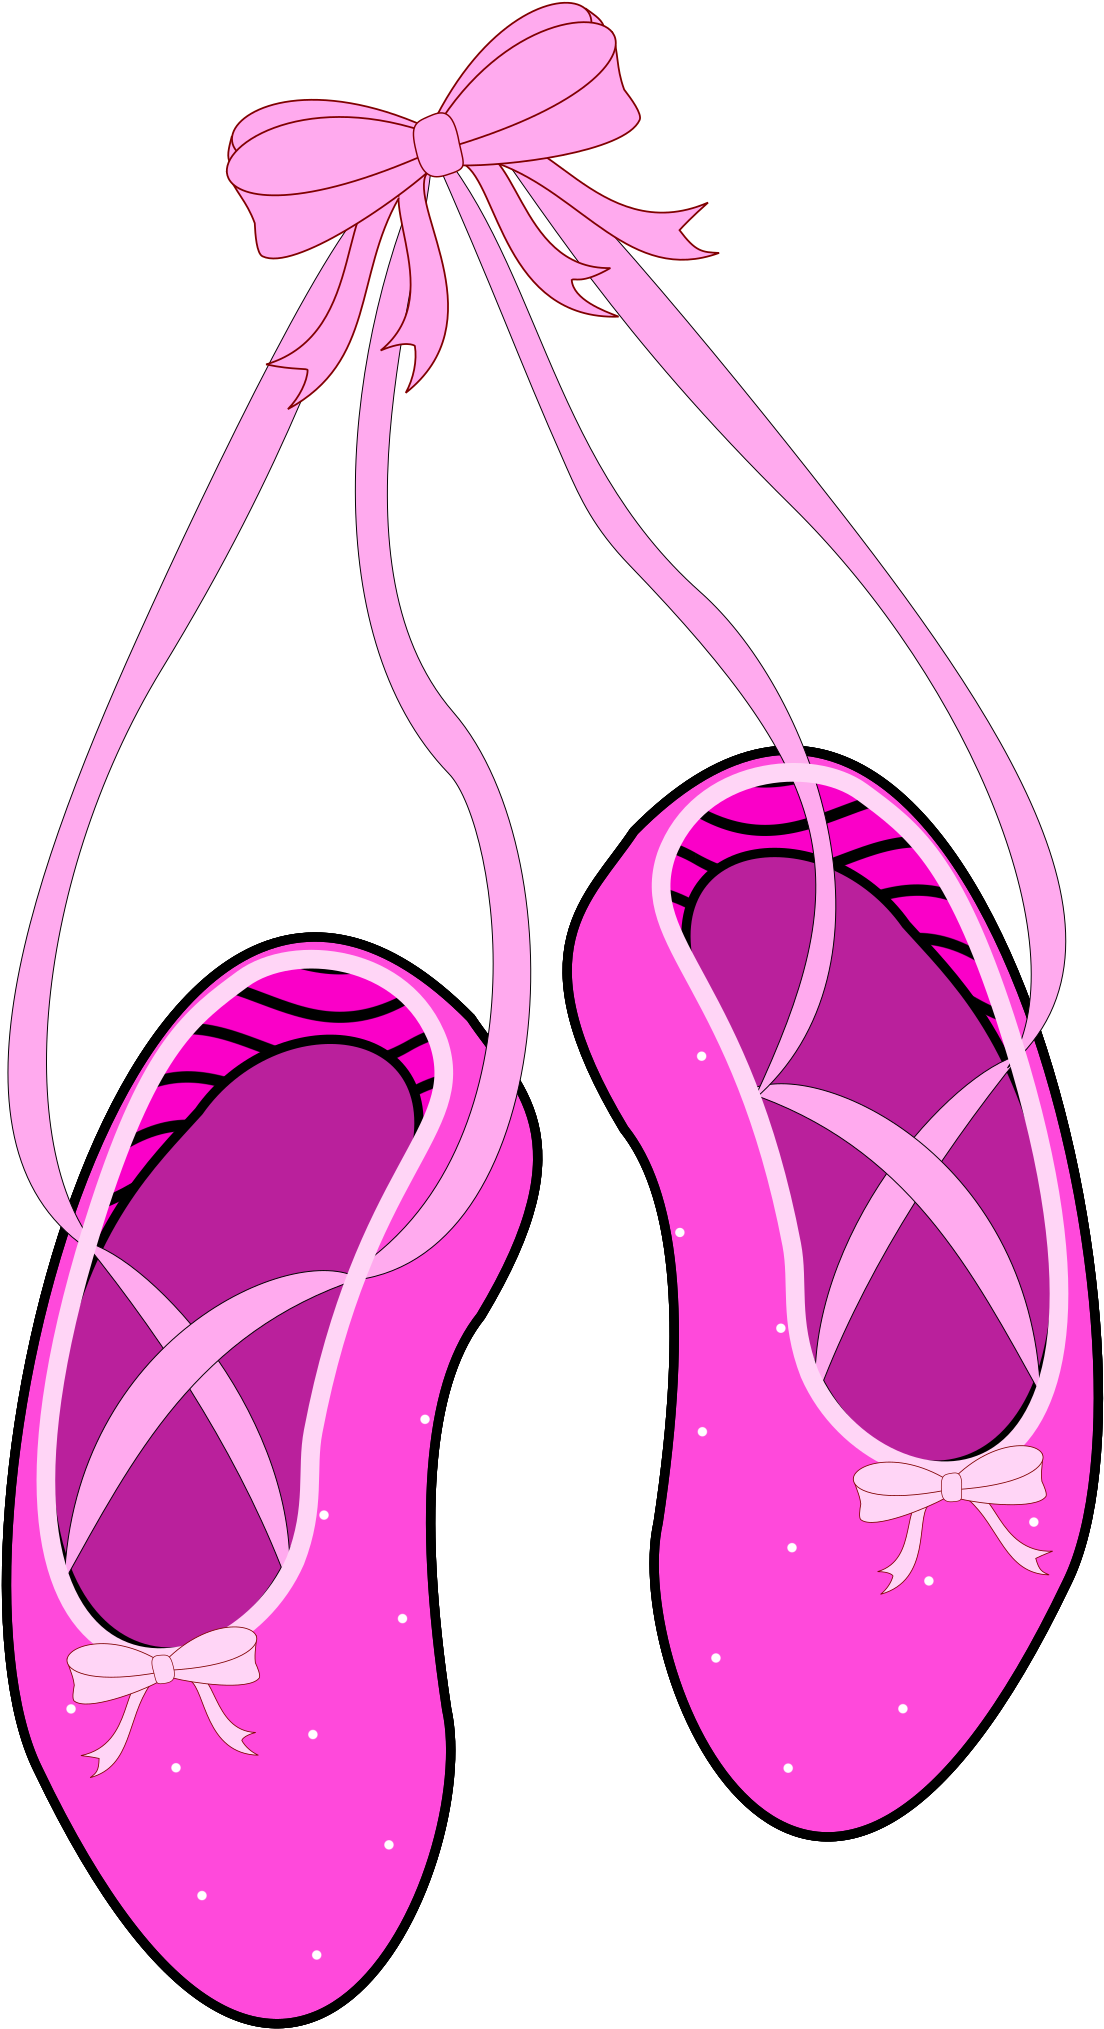 Manificent Design Ballet Shoes With Ribbons Clipart - Manificent Design Ballet Shoes With Ribbons Clipart (1475x2400)